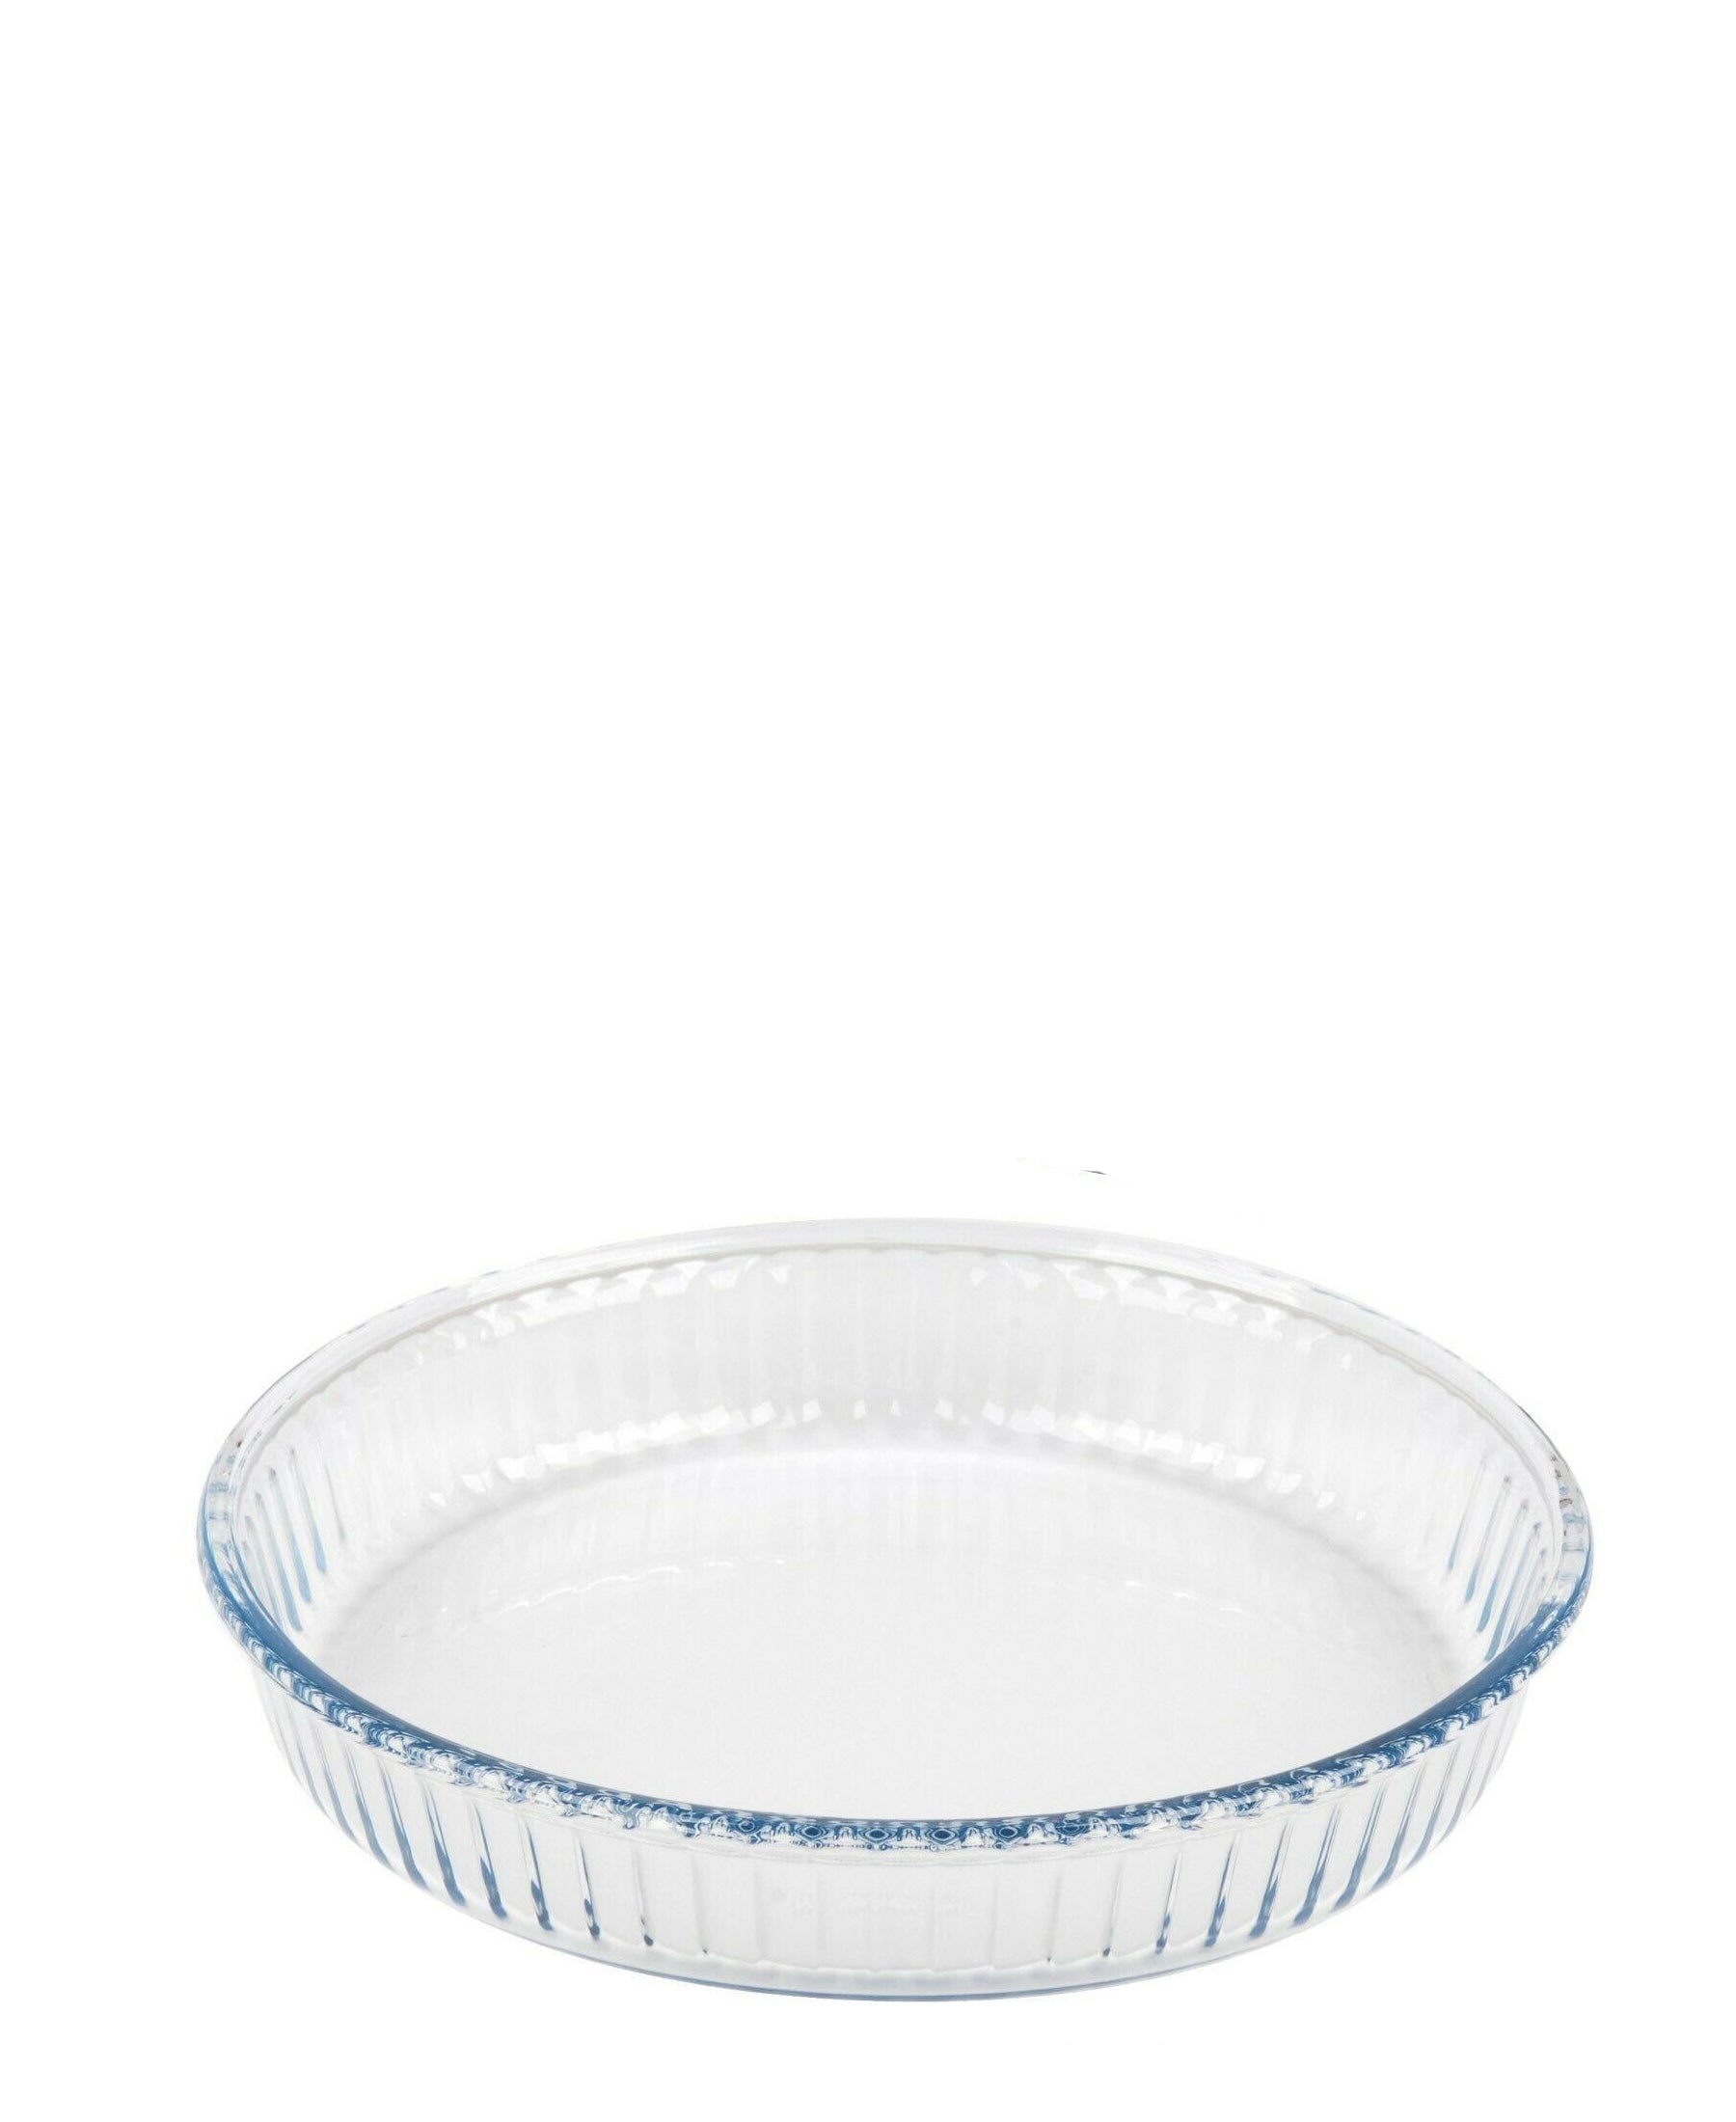 Borcam Round Ribbed Flan Dish 26cm - Clear With Blue Tint